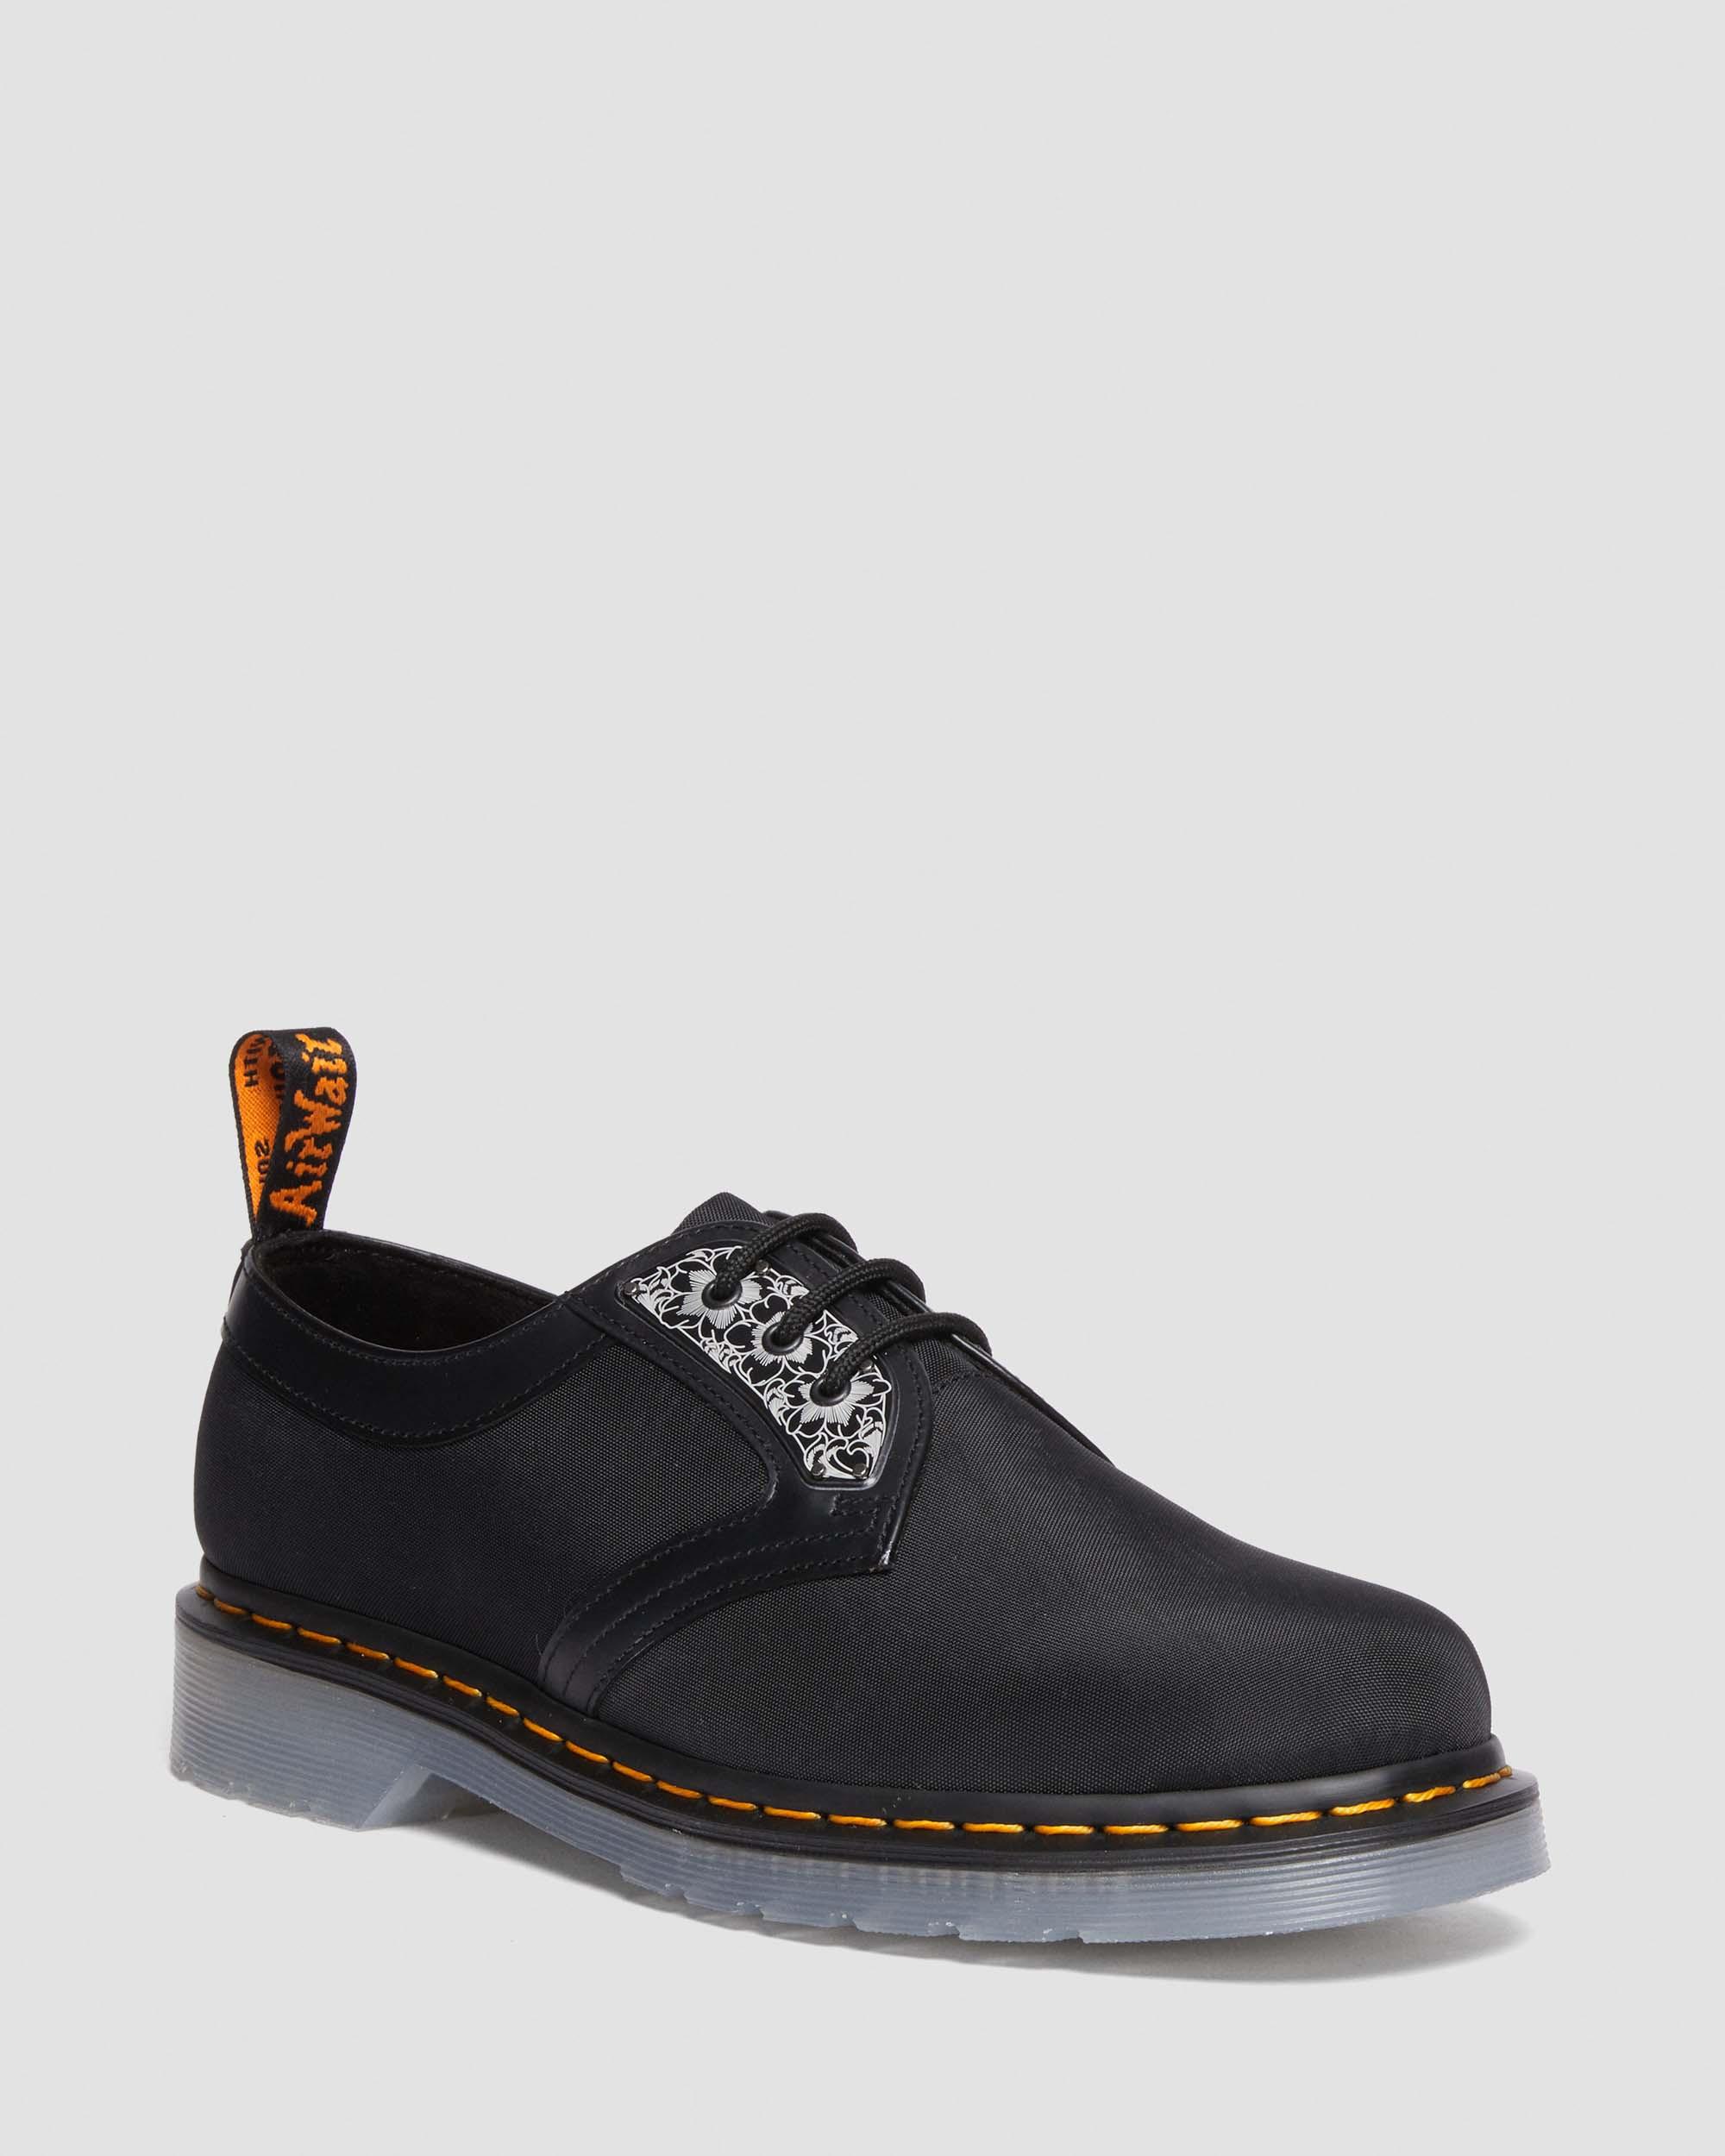 1461 King Nerd Leather Shoes | Dr. Martens